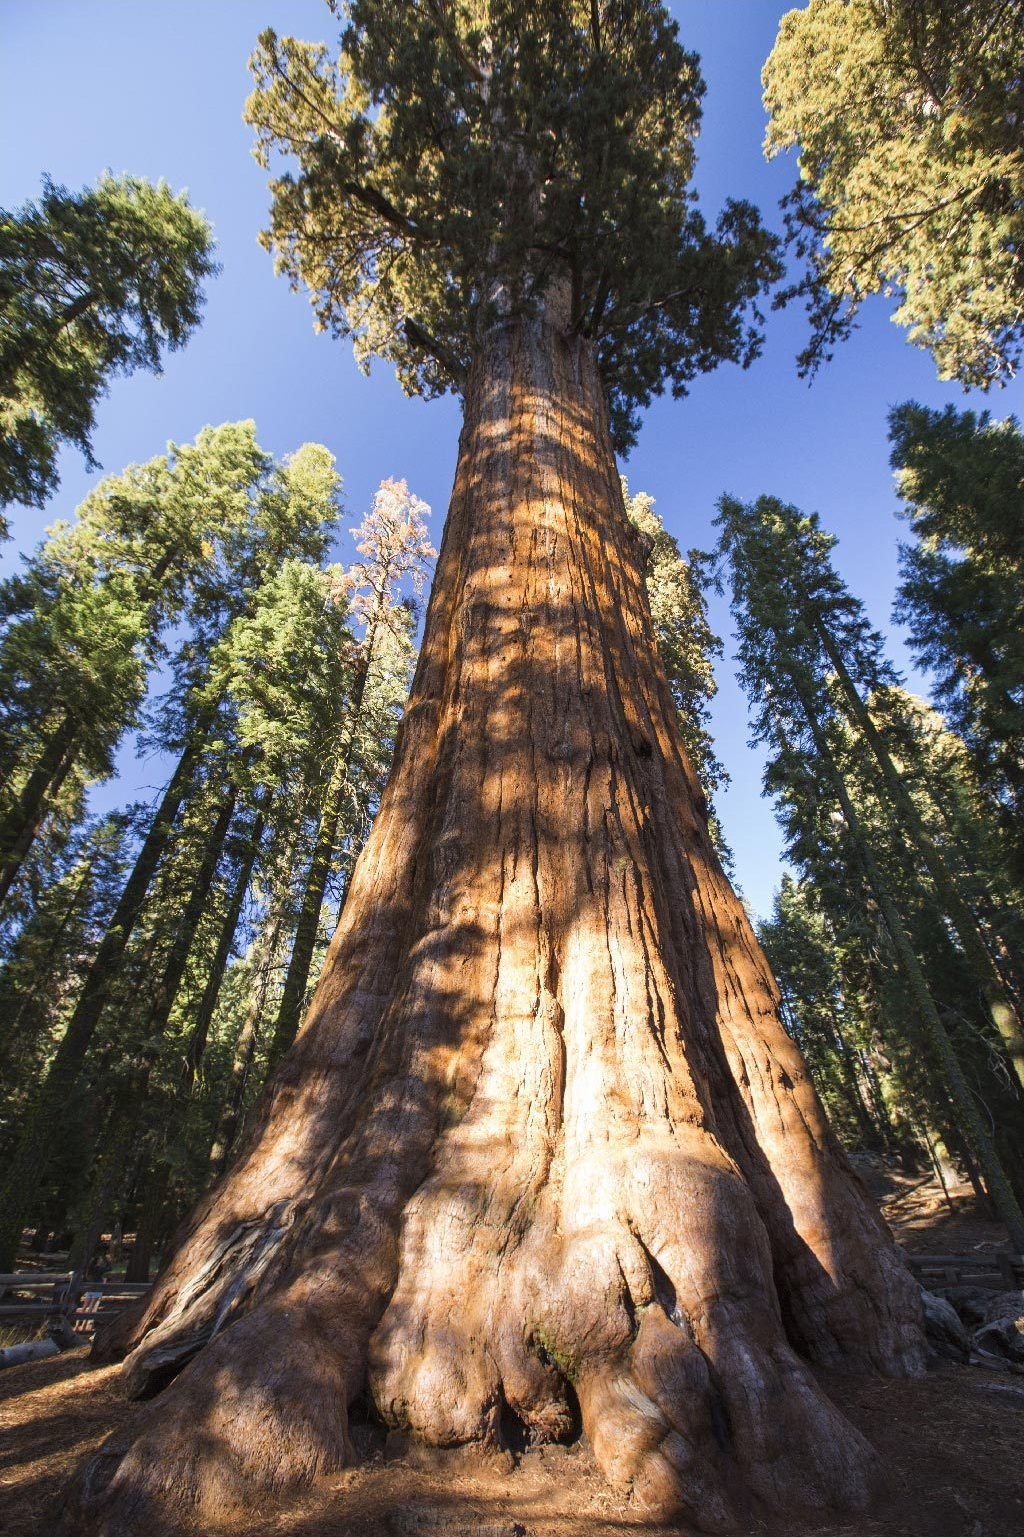 General Sherman, The Giant Sequoia, Is The Single Tallest Single-Stem Tree In The World